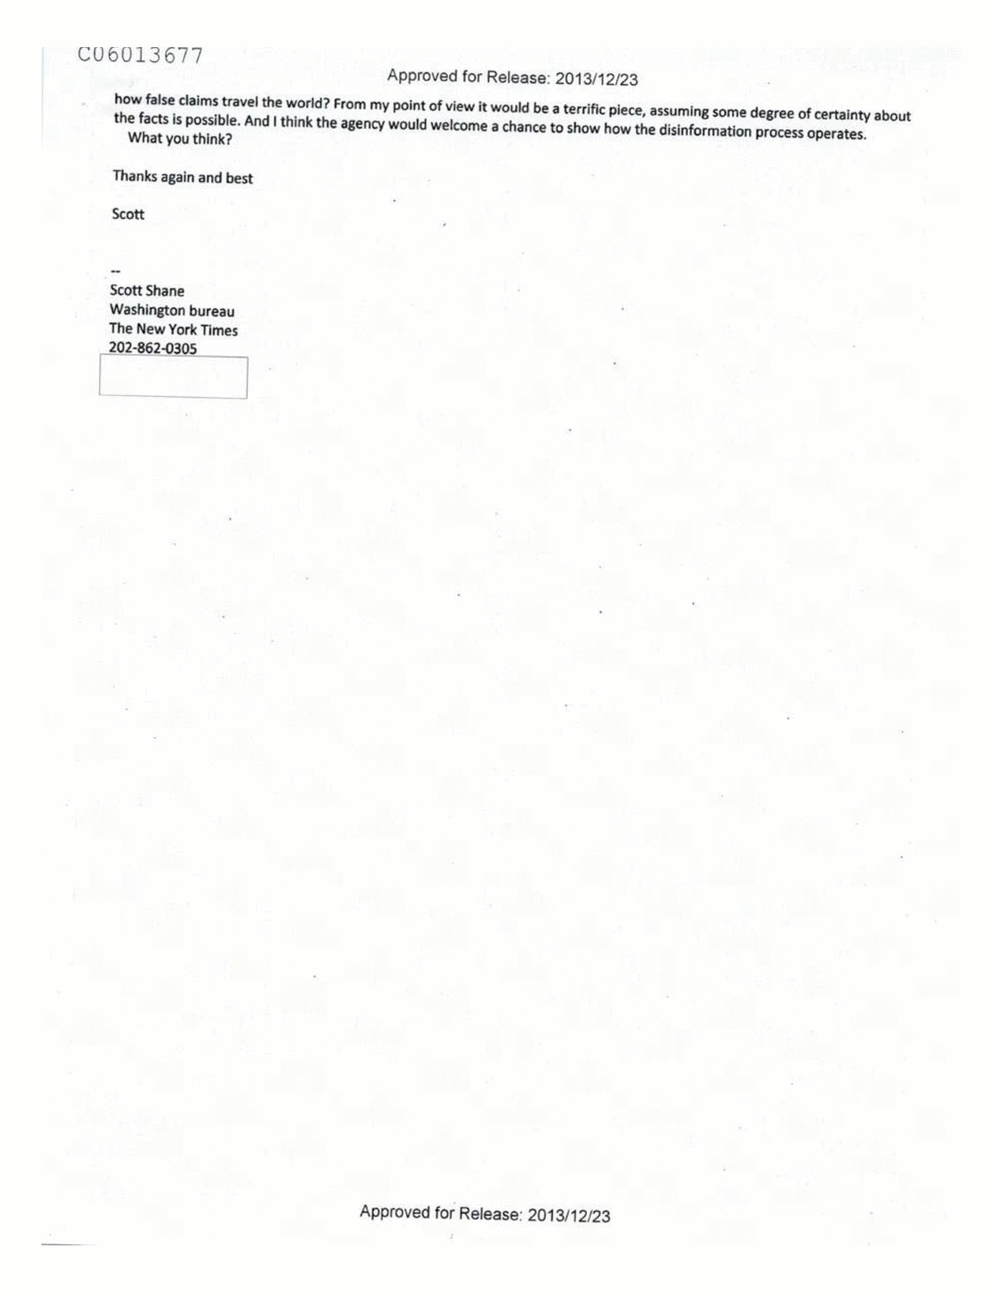 Page 533 from Email Correspondence Between Reporters and CIA Flacks